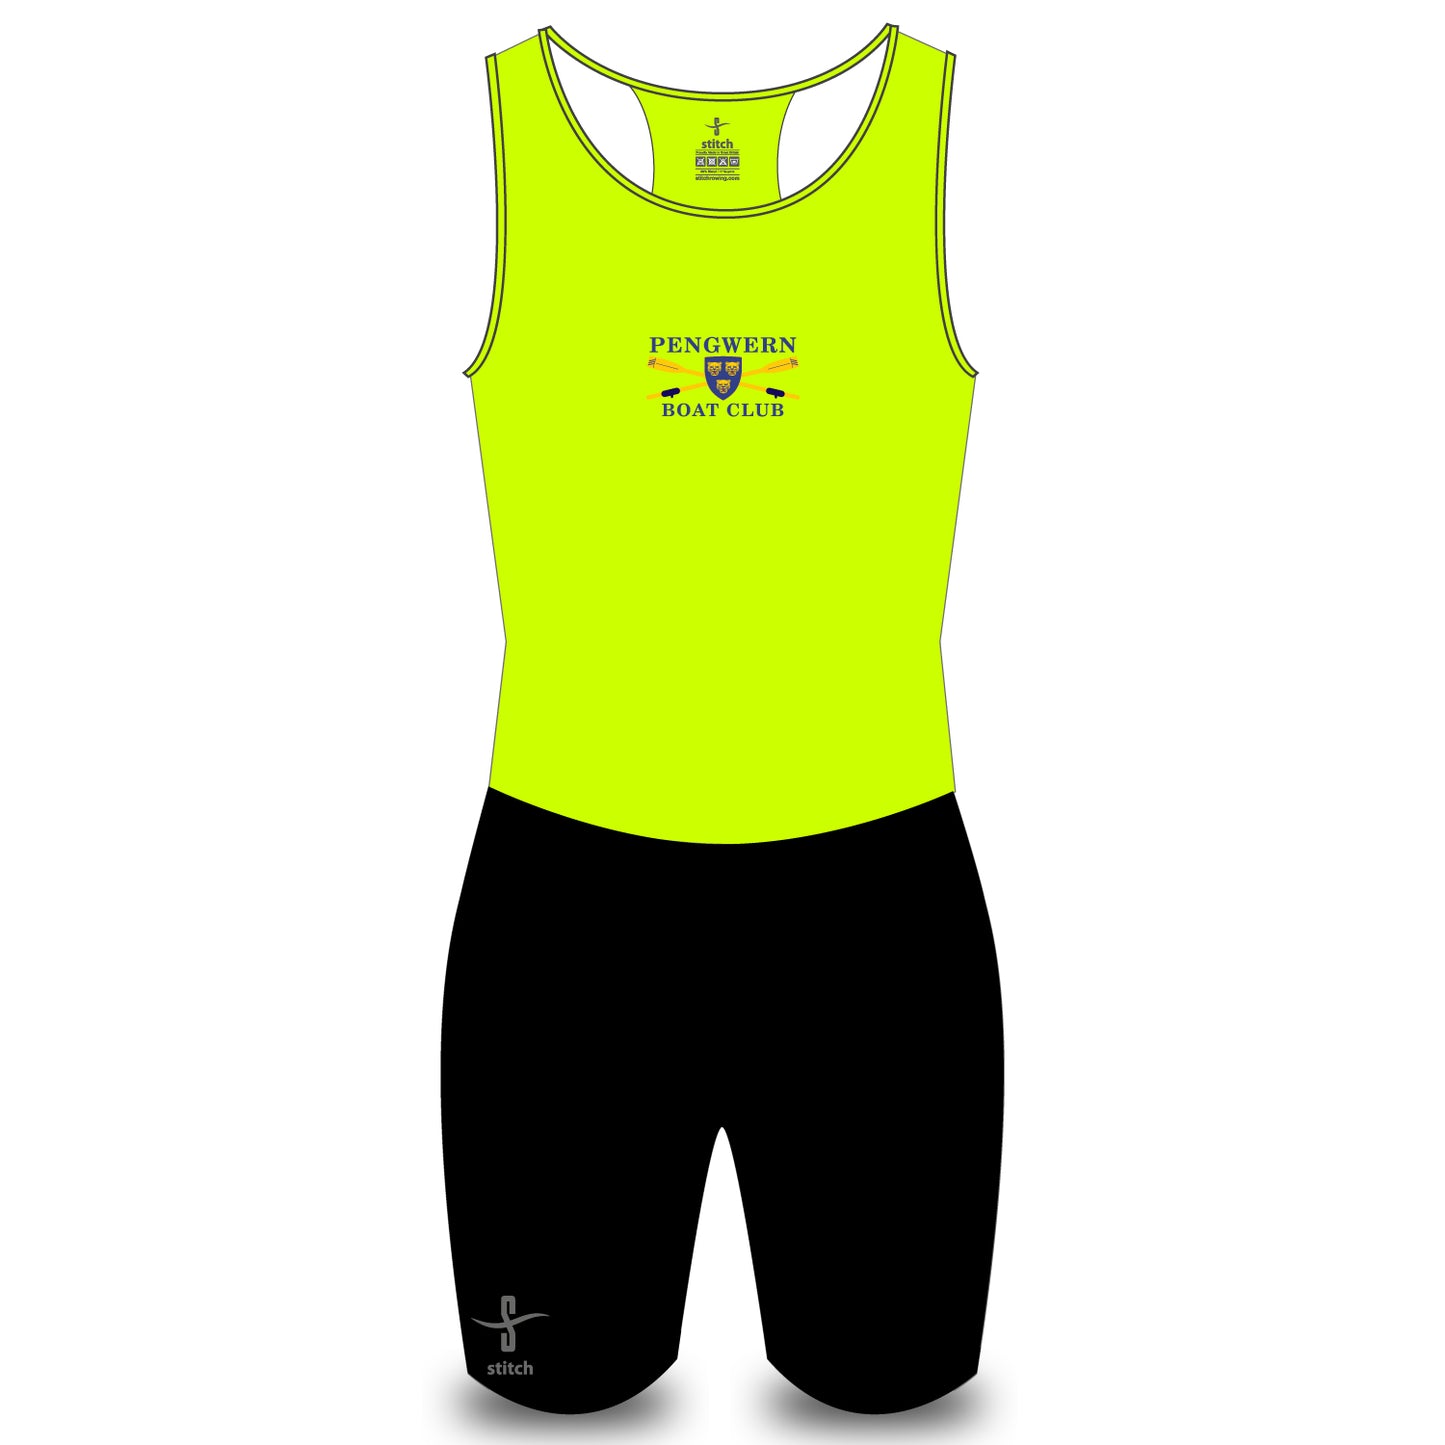 Pengwern Boat Club Fluorescent Yellow AIO